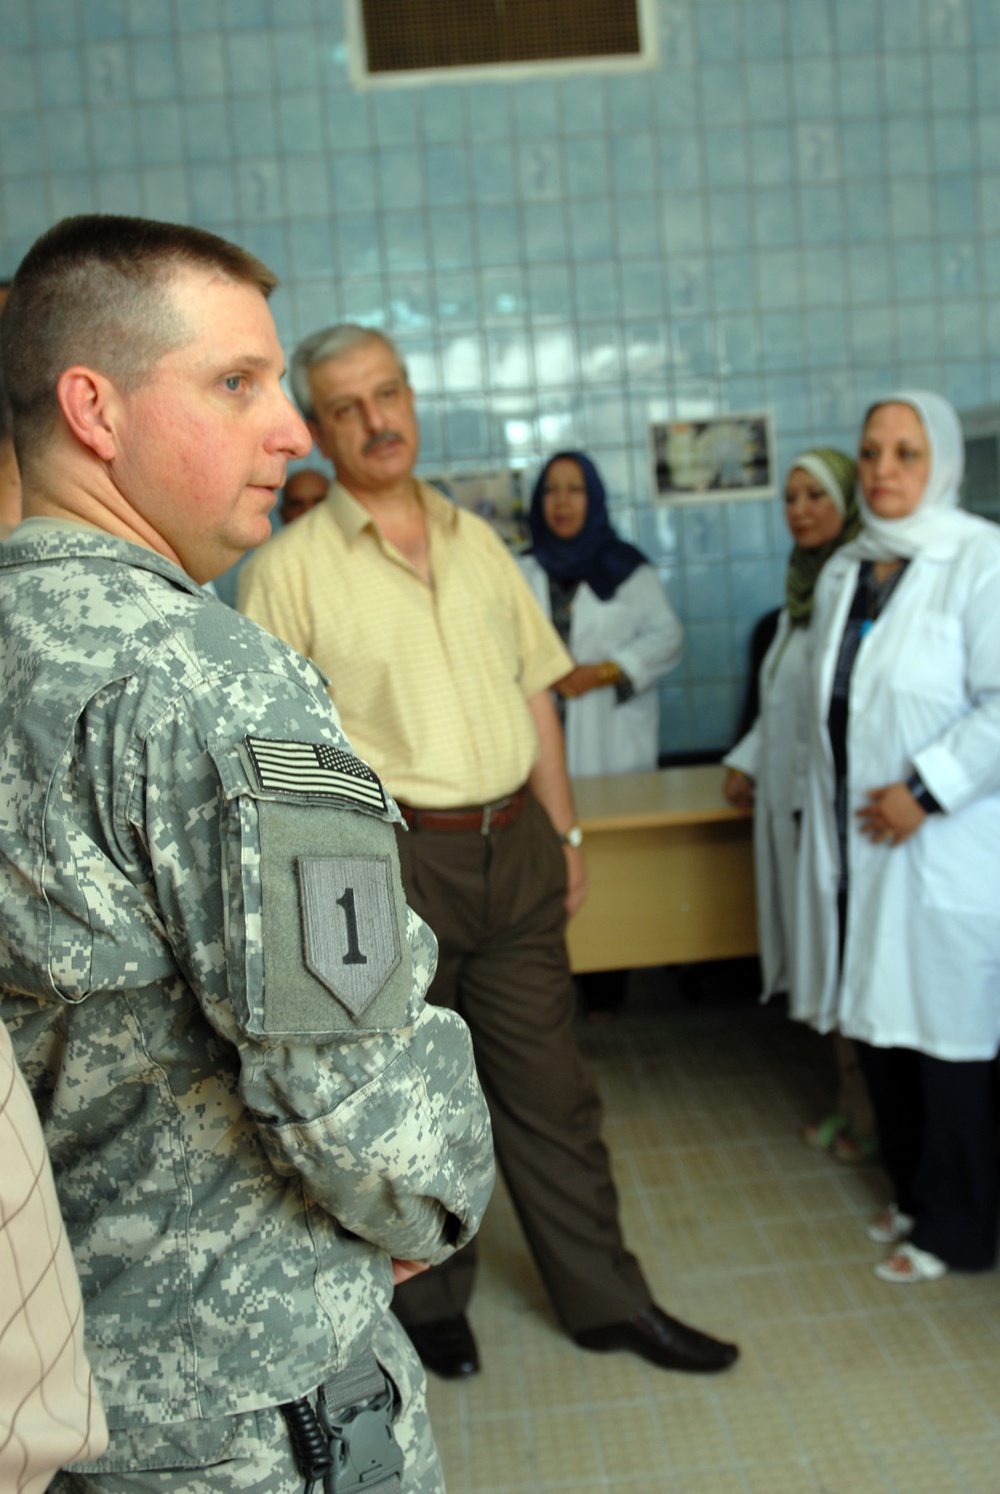 Local clinic re-opens, rejuvenates disabled Iraqis